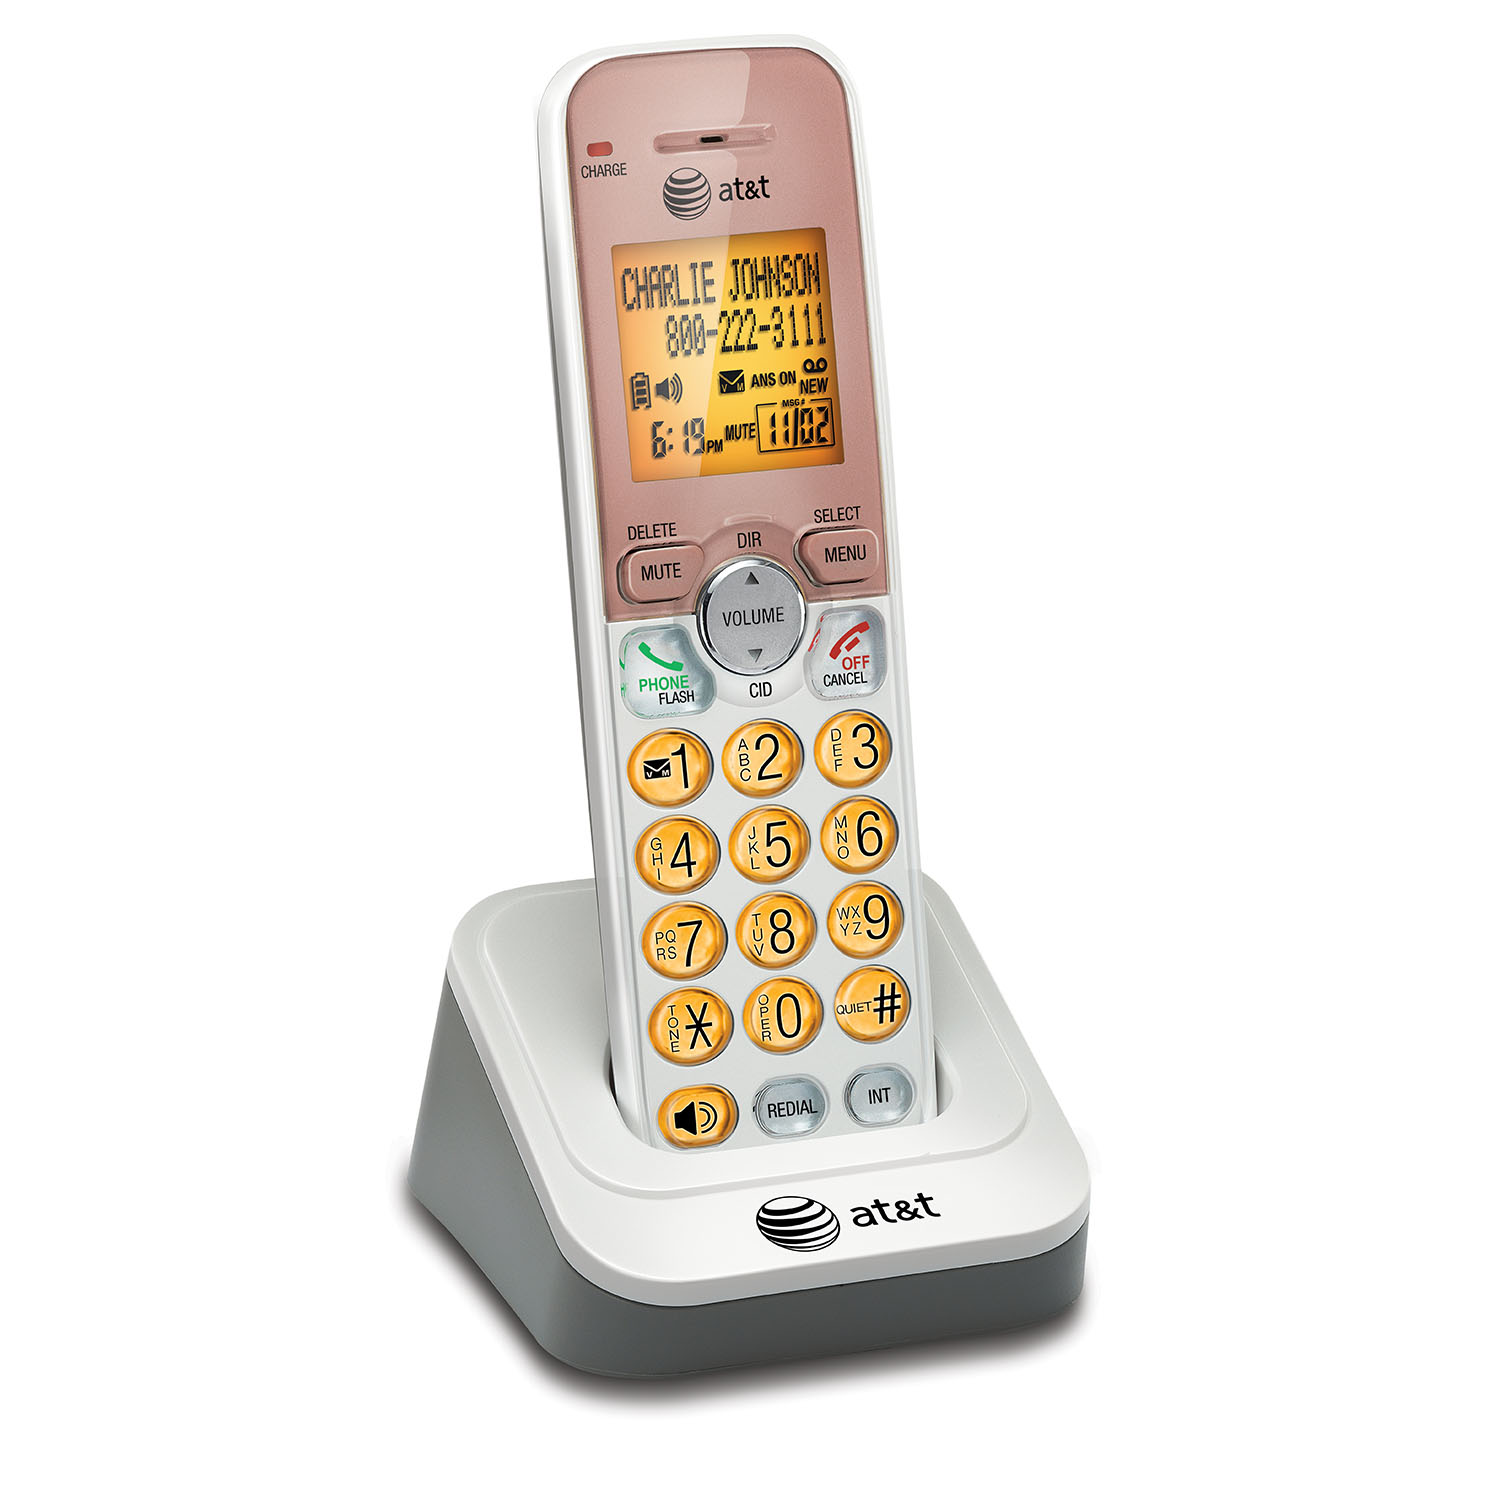 5 handset cordless answering system with caller ID/call waiting - view 10